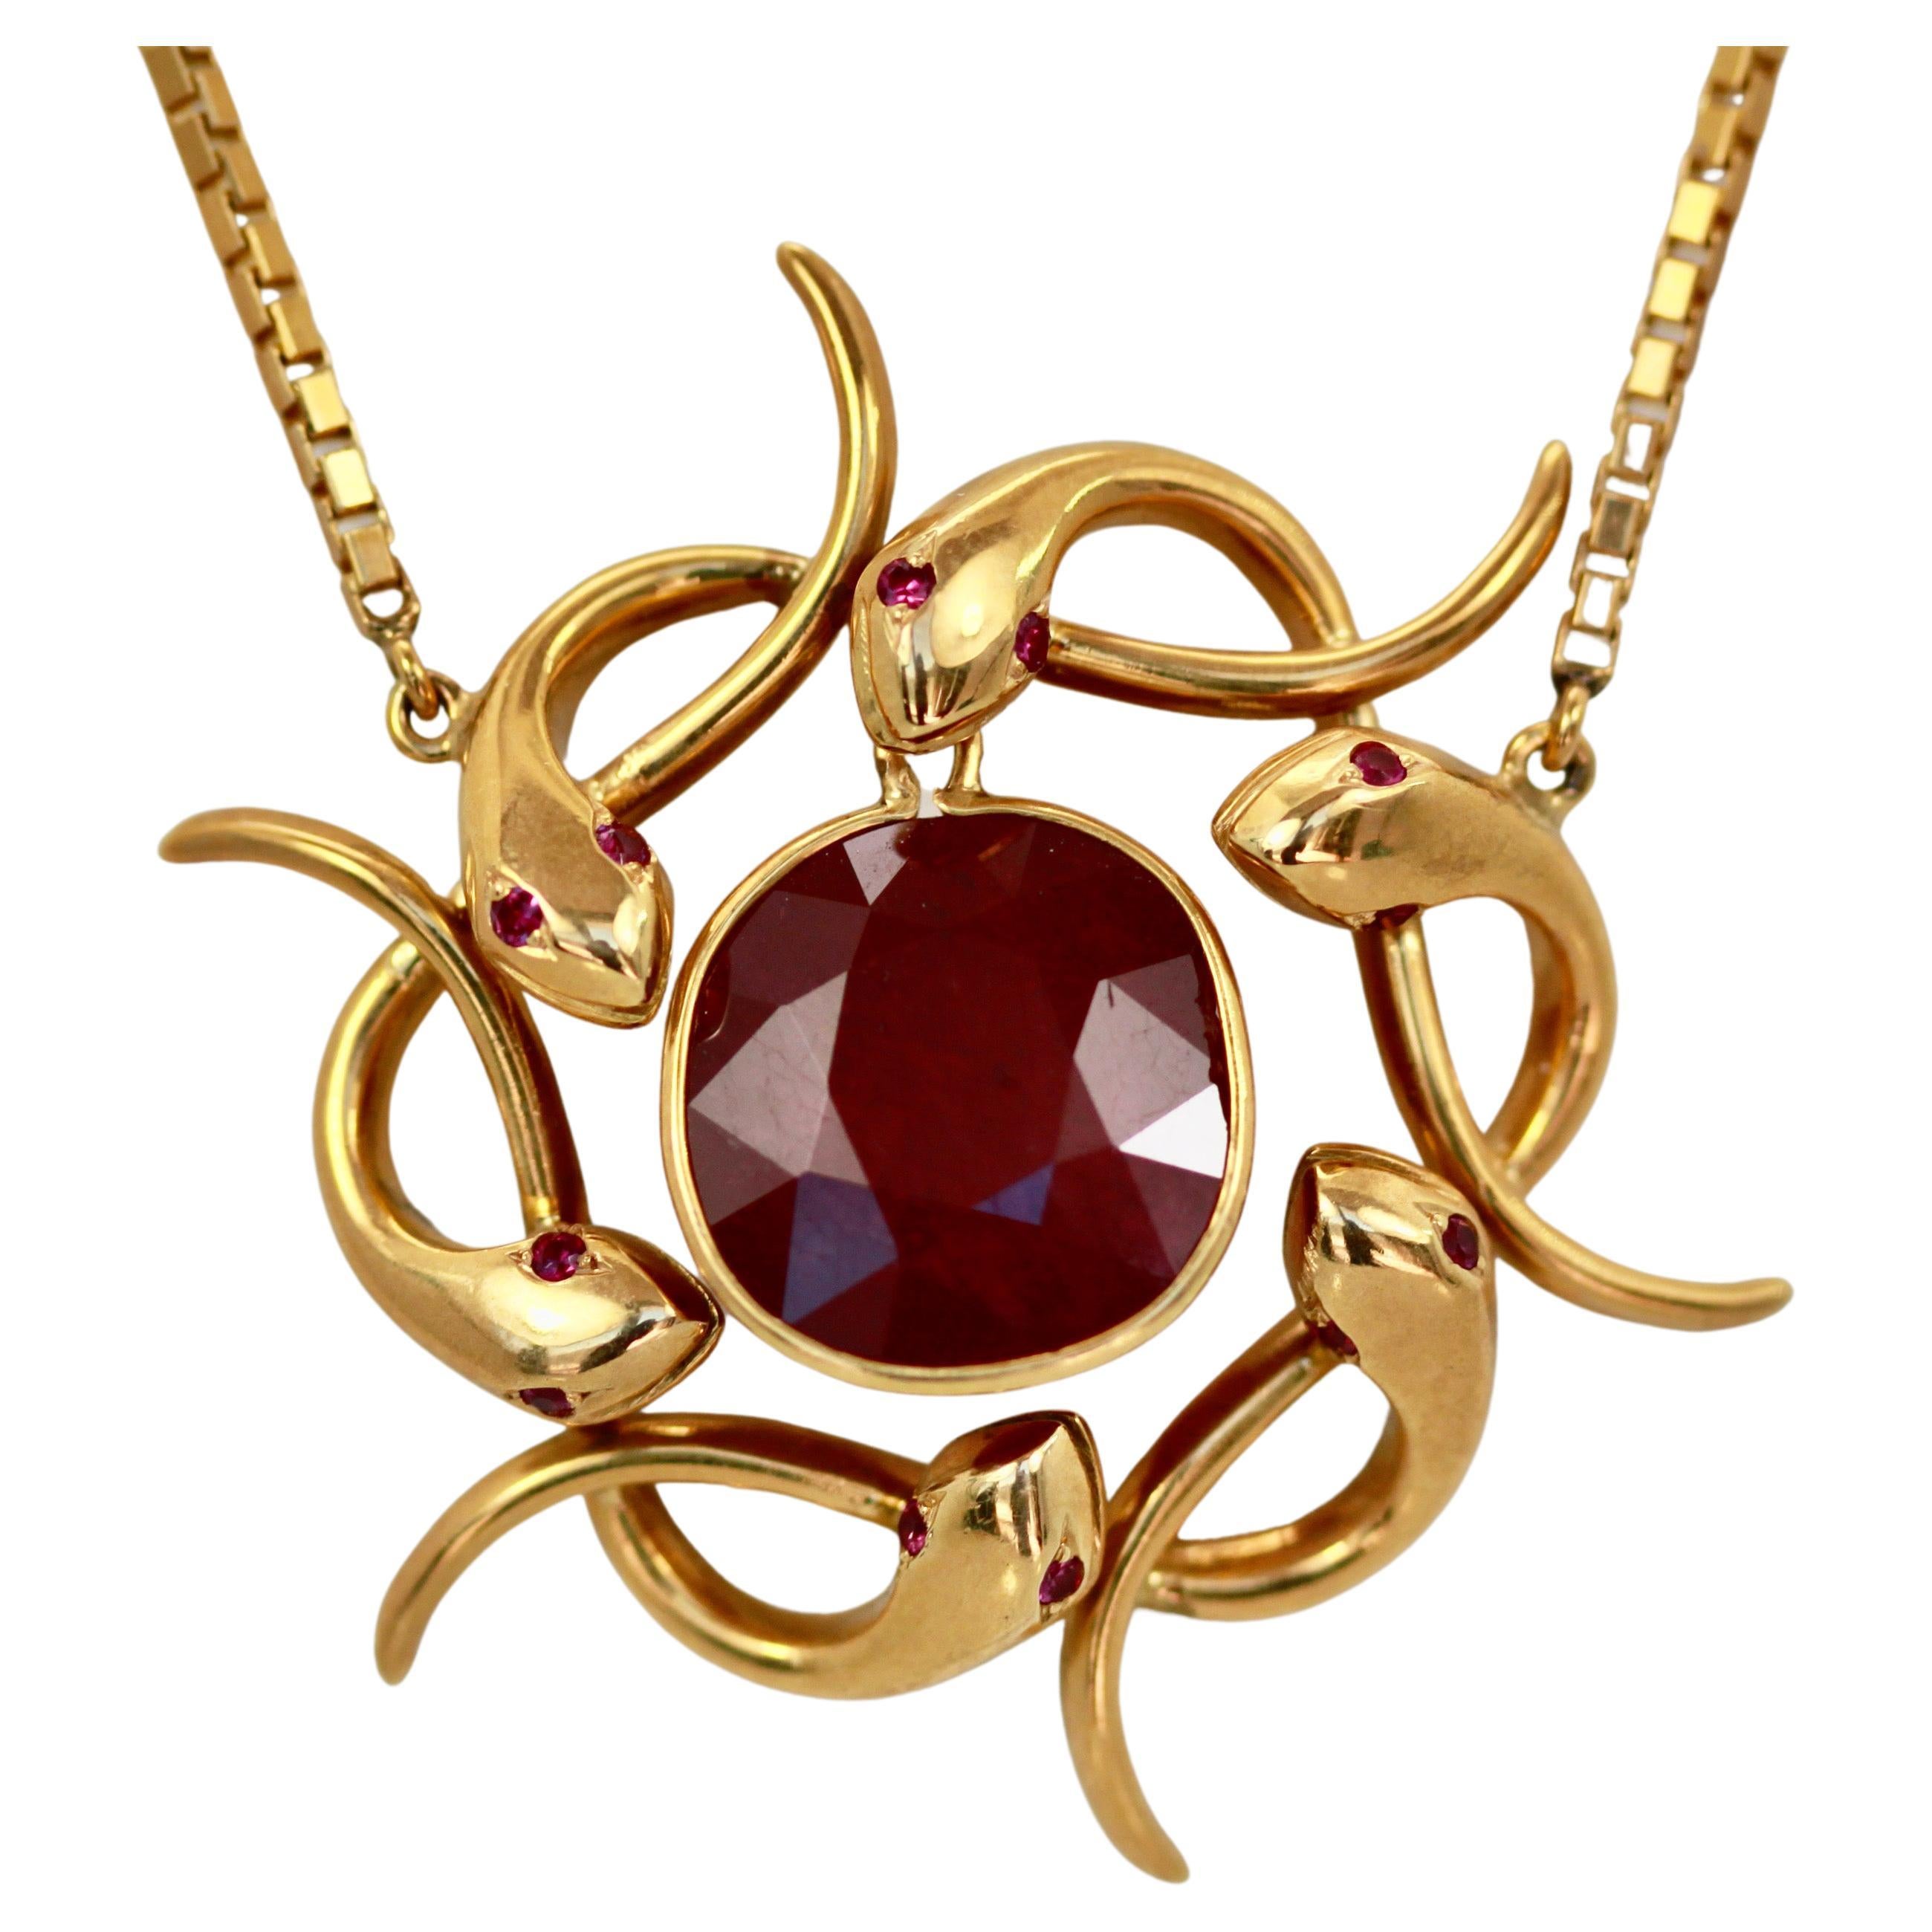 Retro Snake Pendant with 9 Carat Ruby in 14k & 22k Gold